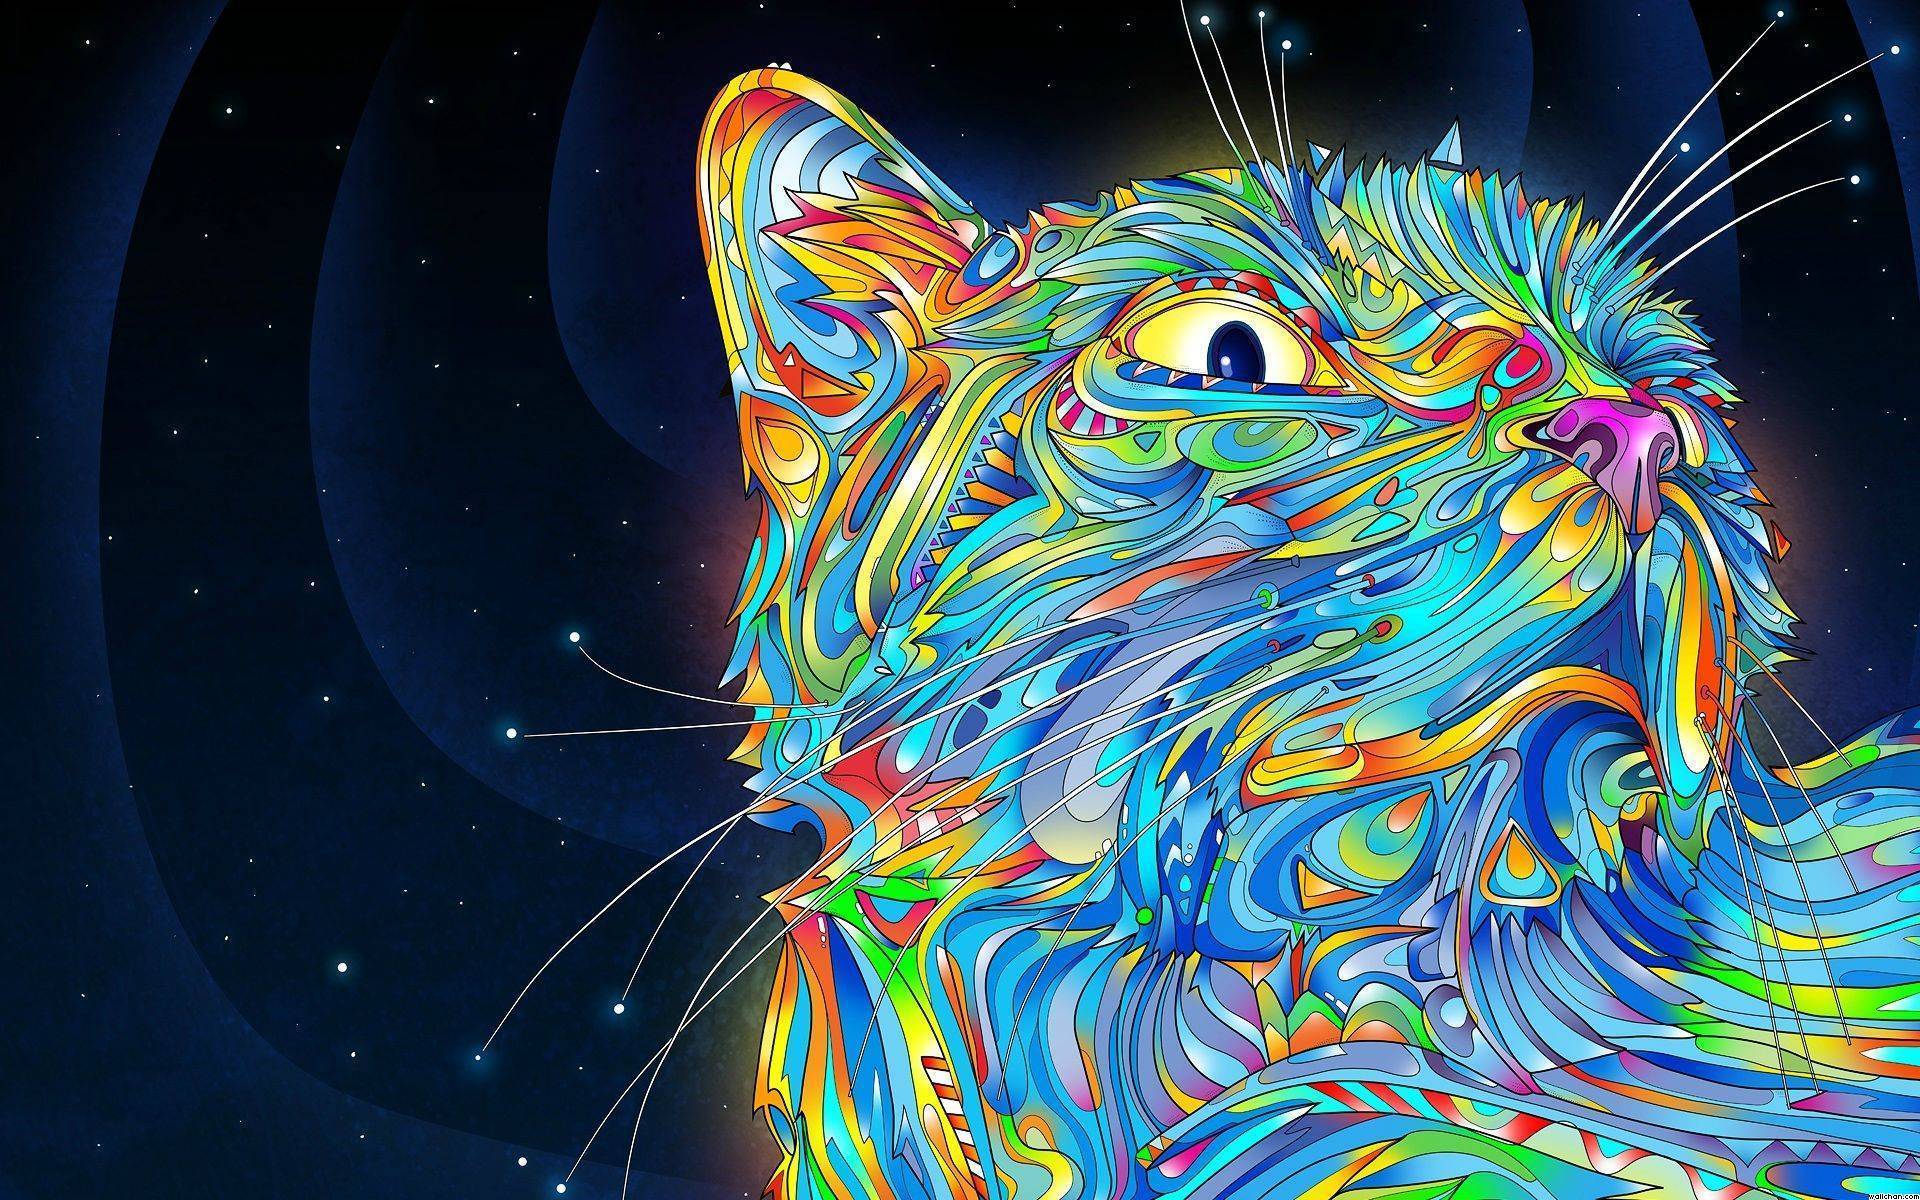 And here's my collection of trippy cat gifs! - Album on Imgur